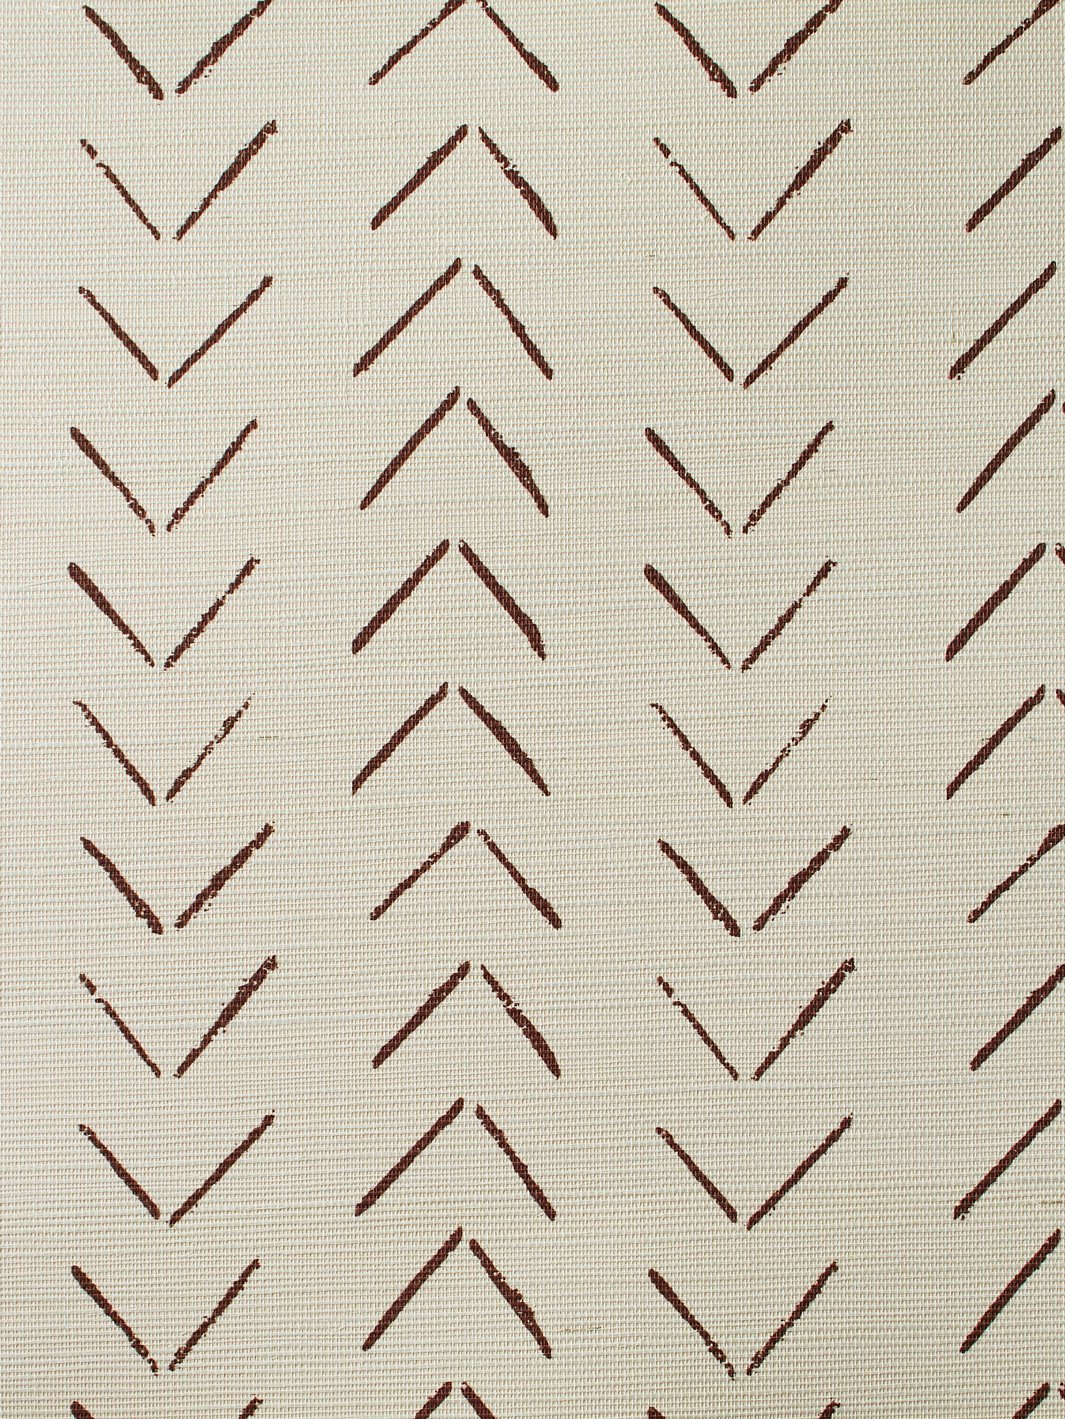 'Arrows' Grasscloth' Wallpaper by Nathan Turner - Chocolate